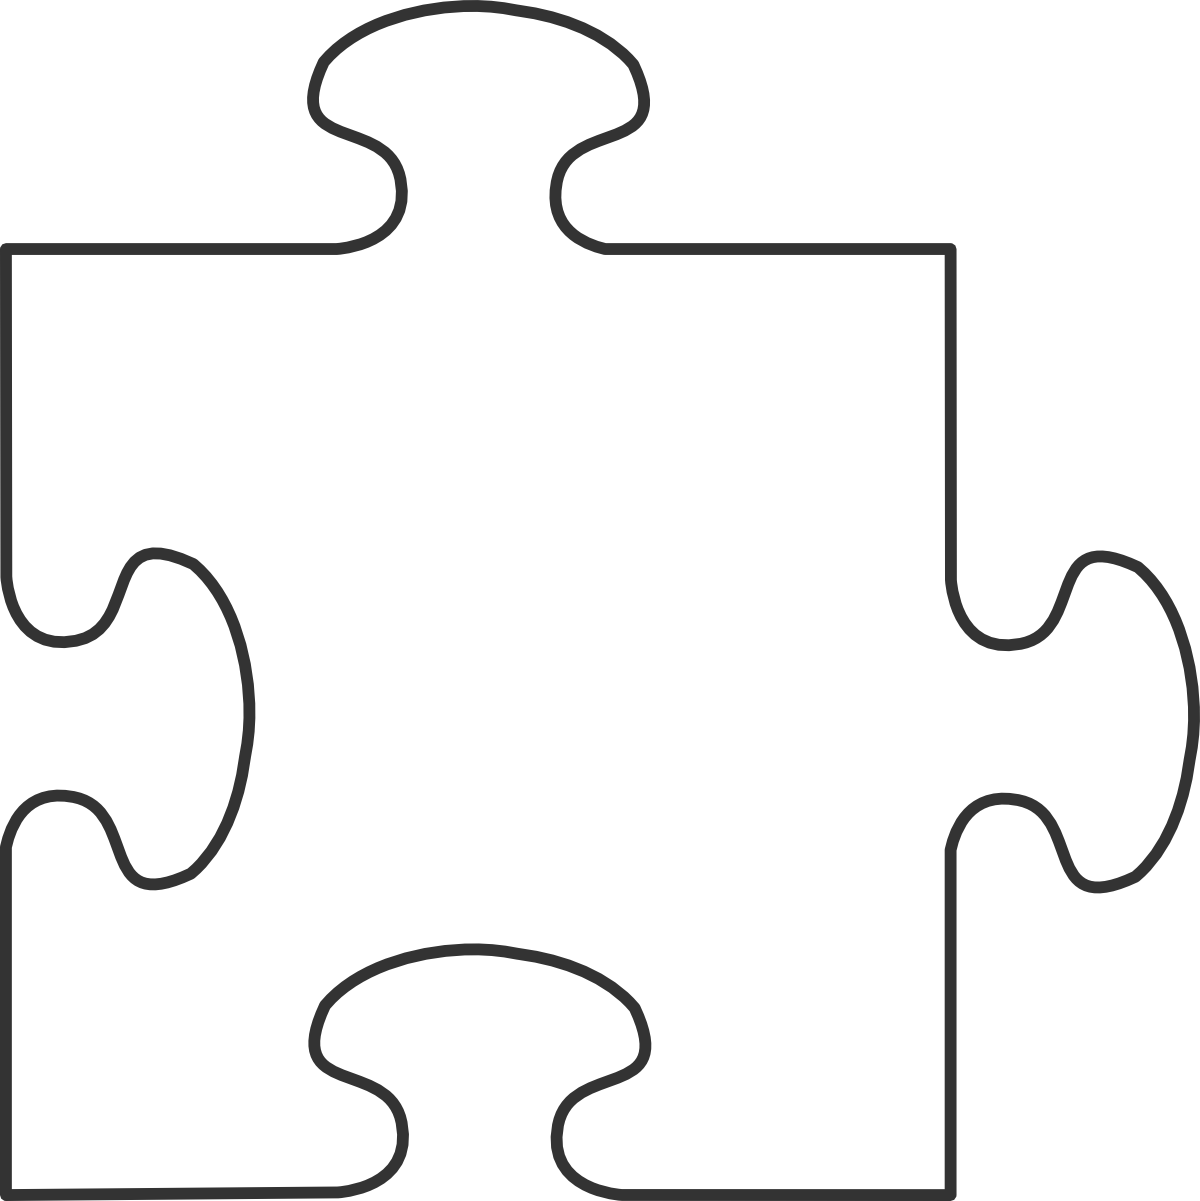 Puzzle piece gallery for animated puzzle clip art image